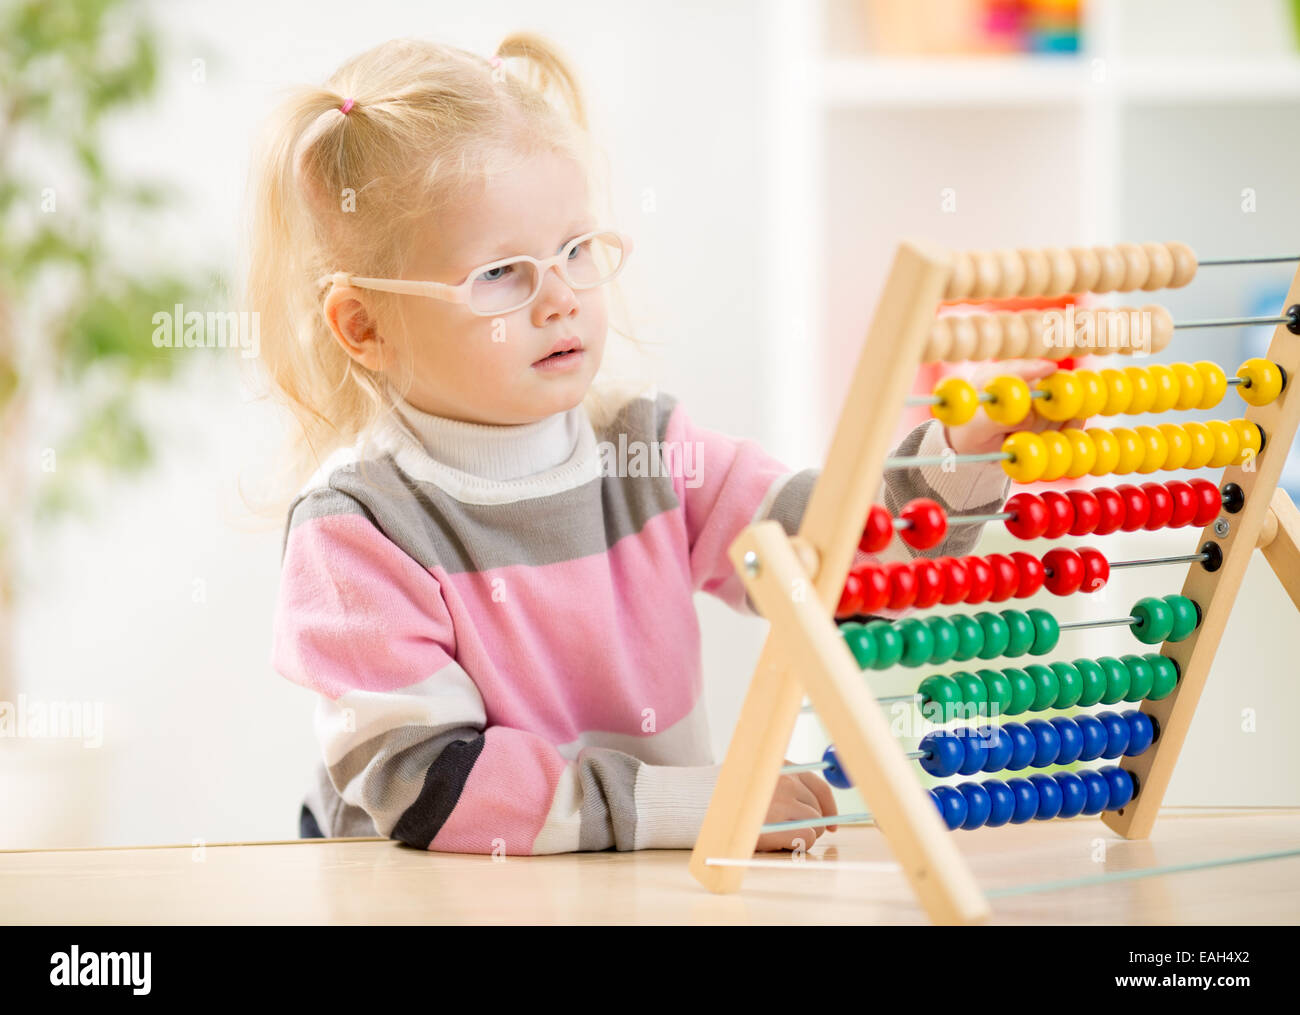 Funny kid in eyeglases counting using abacus Stock Photo